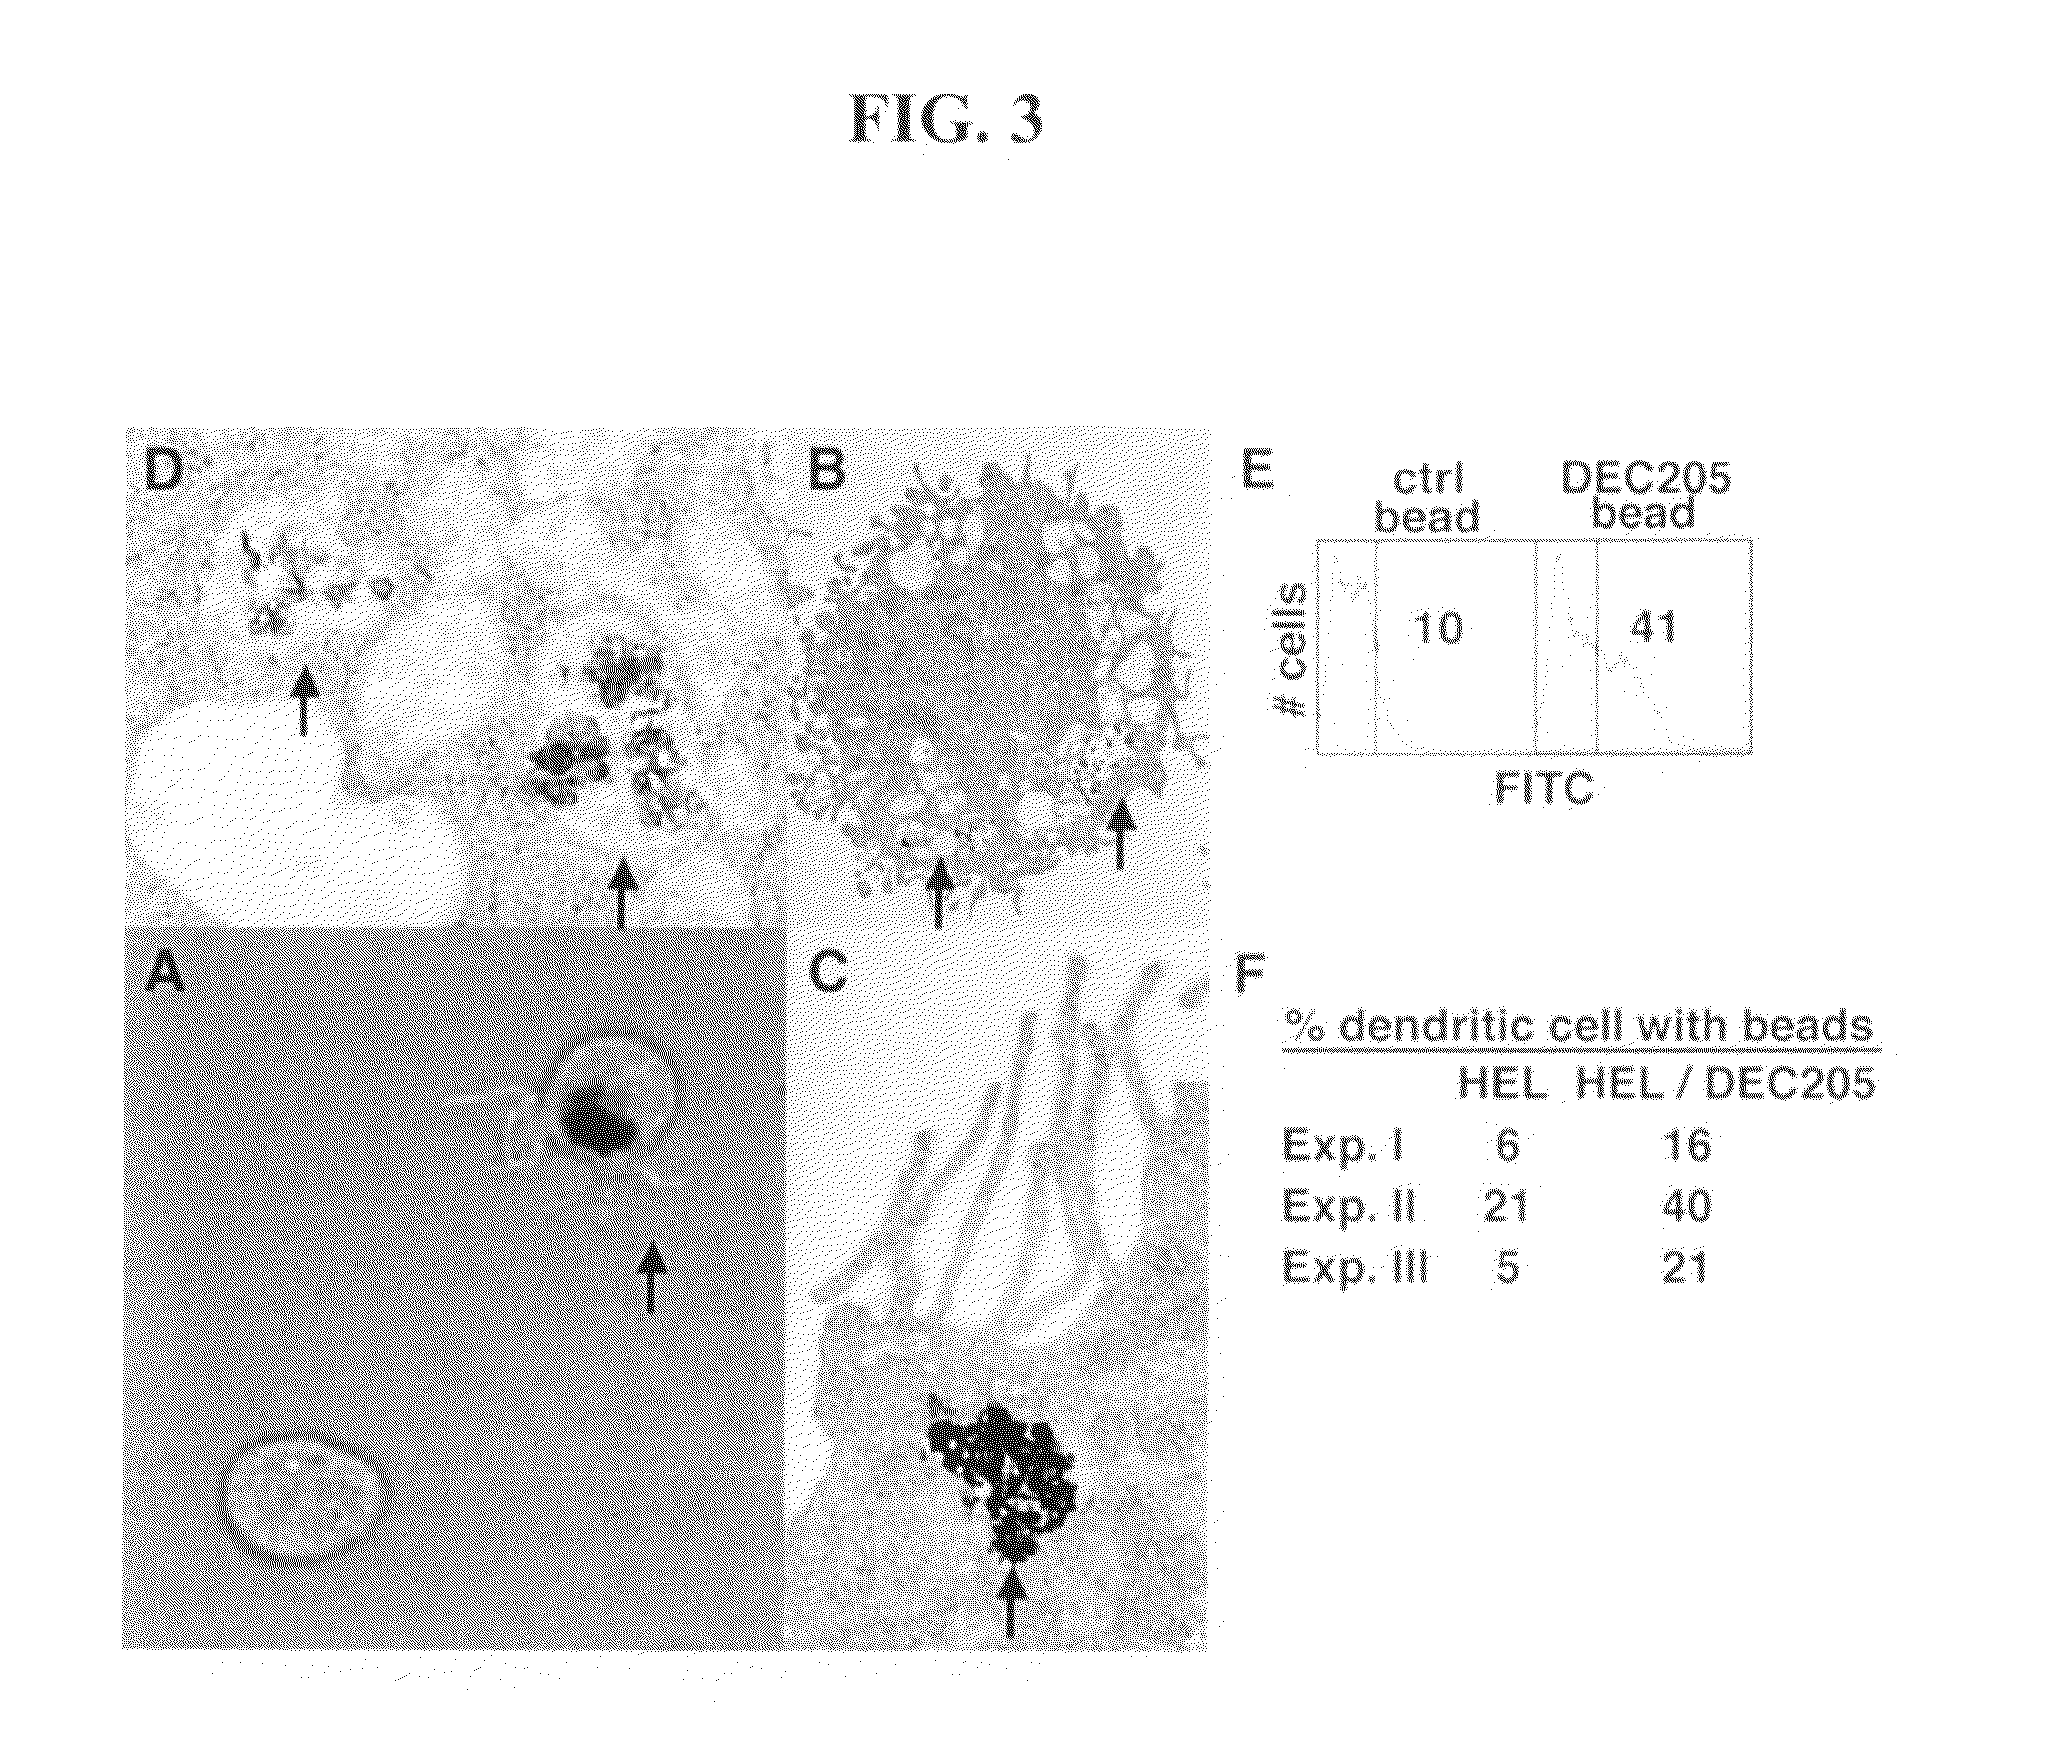 Dendritic cell targeting compositions and uses thereof